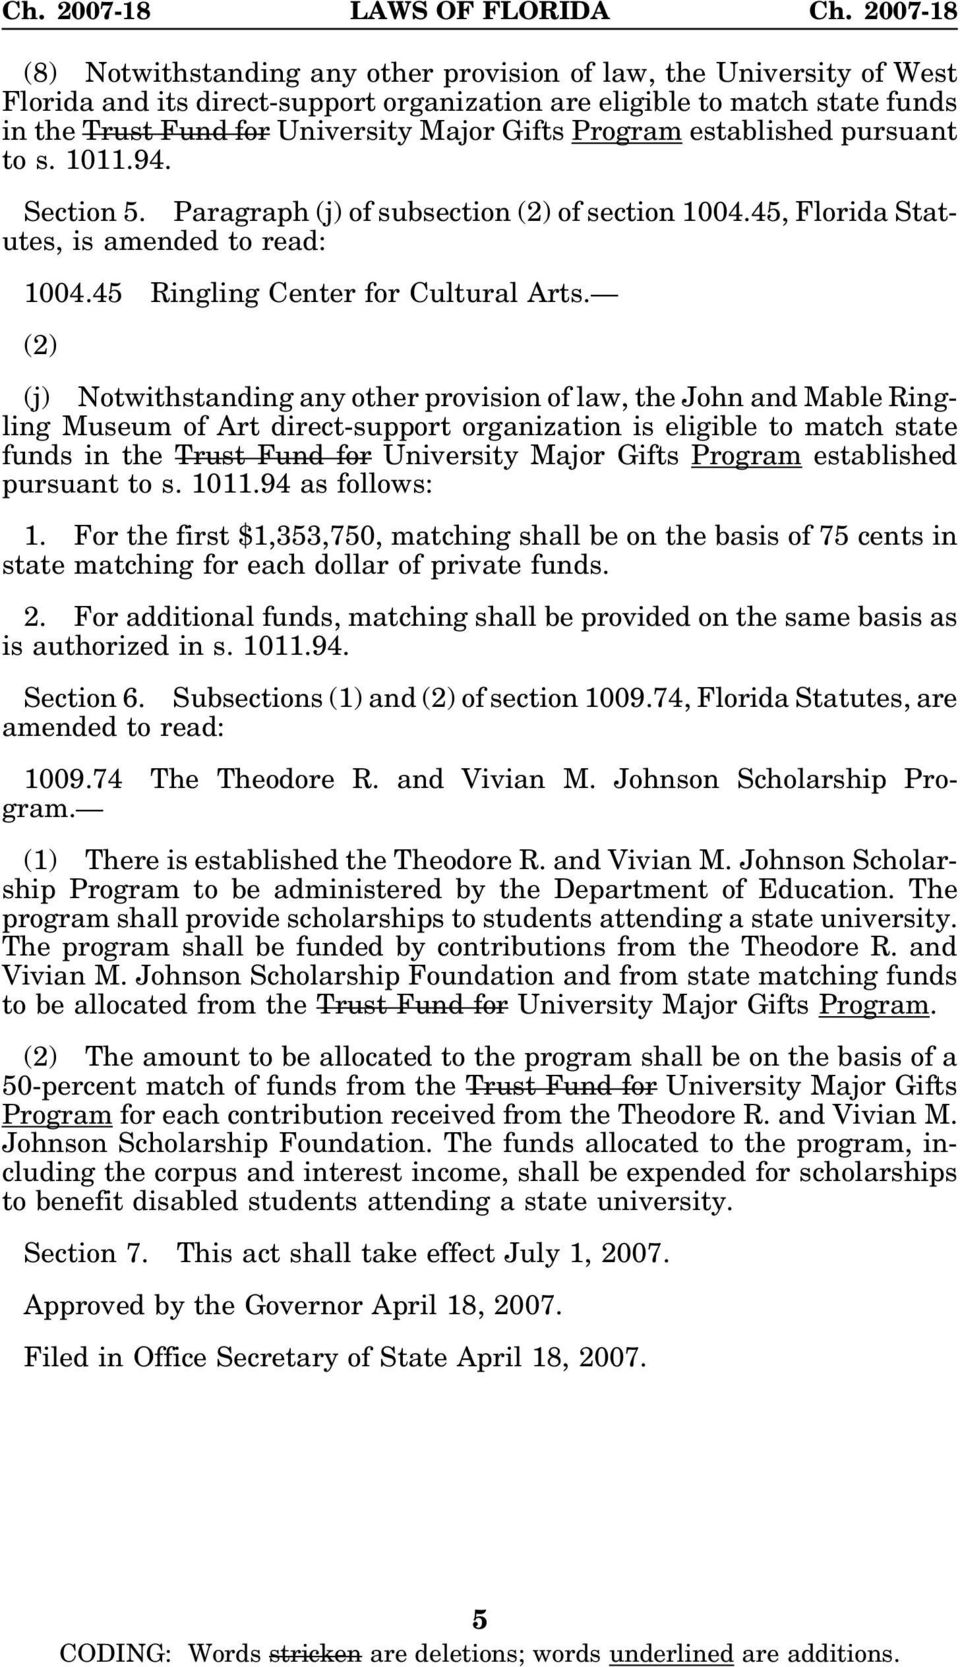 (2) (j) Notwithstanding any other provision of law, the John and Mable Ringling Museum of Art direct-support organization is eligible to match state funds in the Trust Fund for University Major Gifts